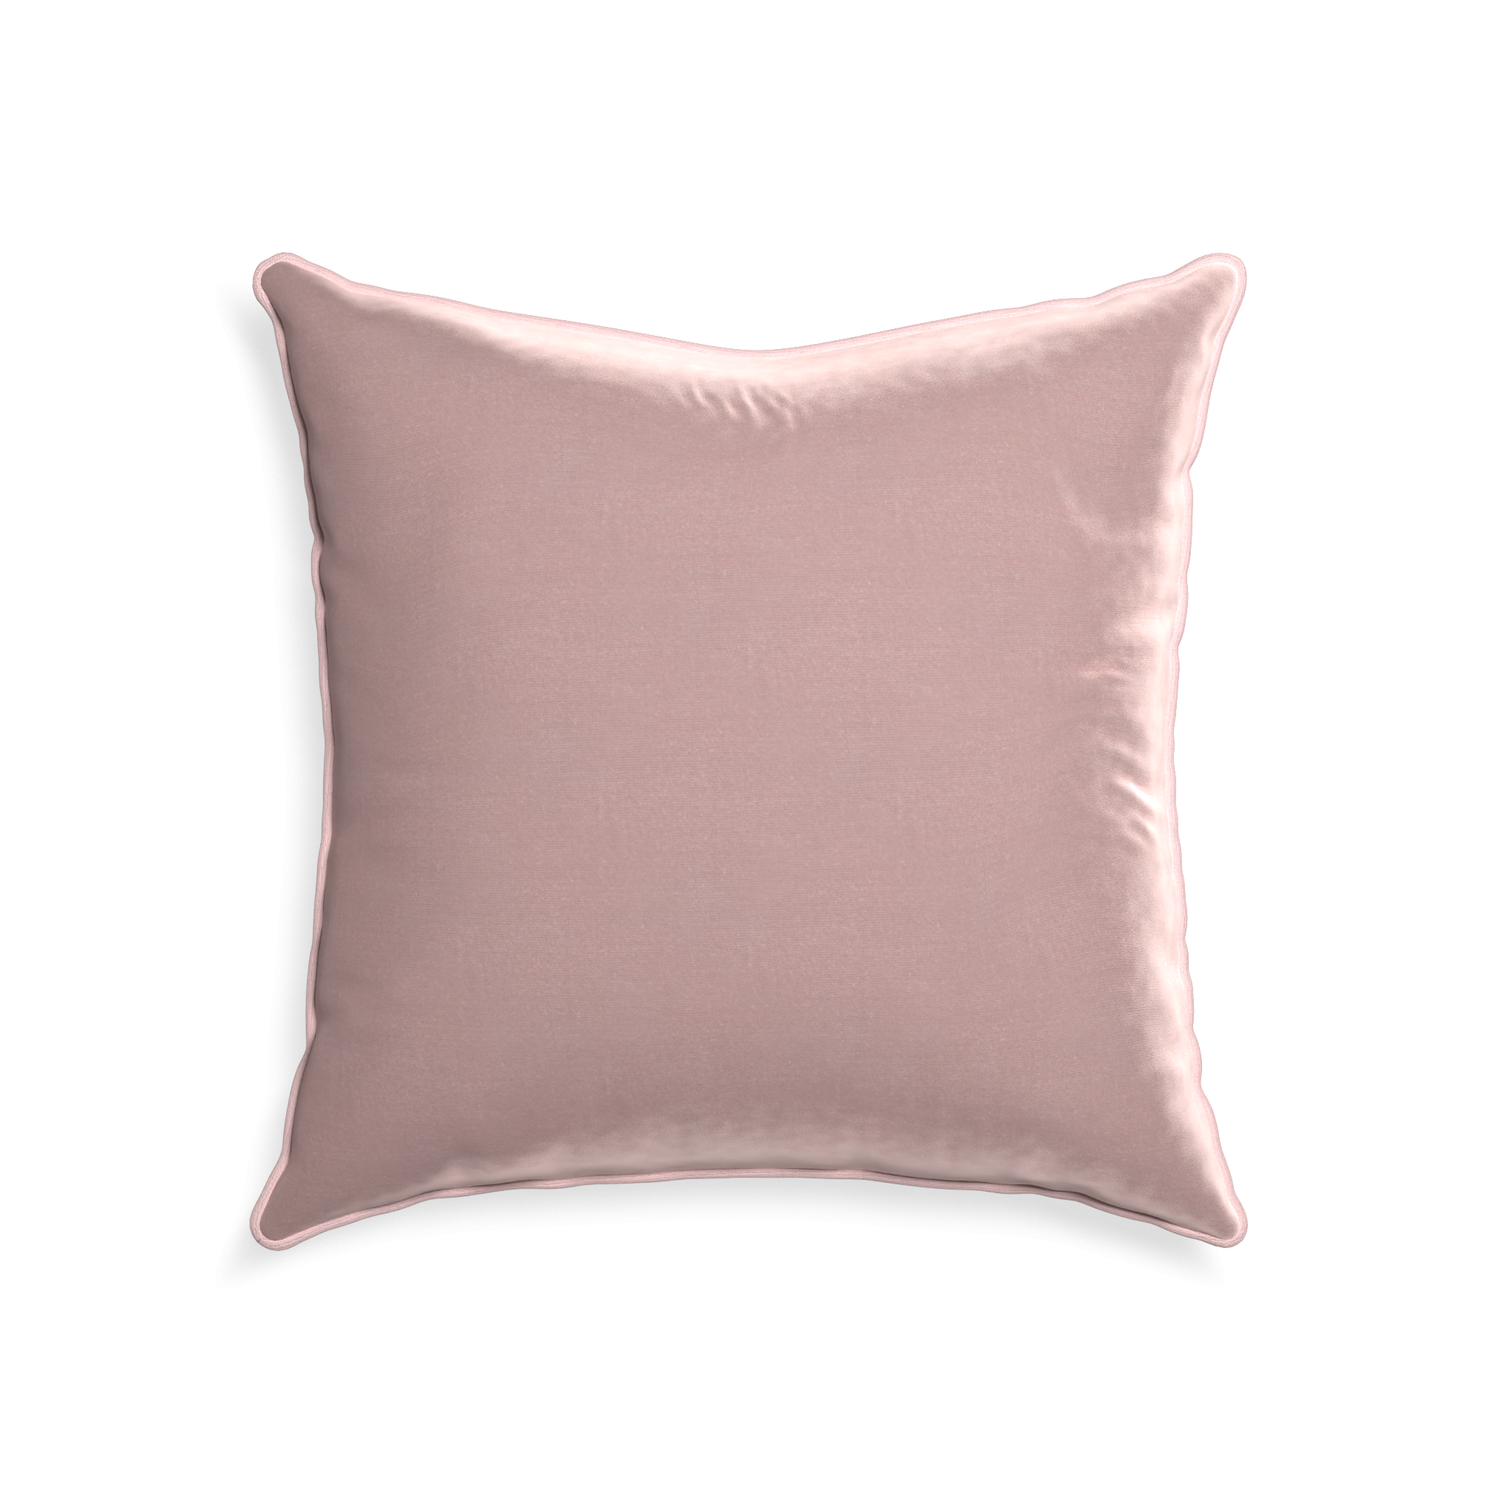 square mauve velvet pillow with light pink piping